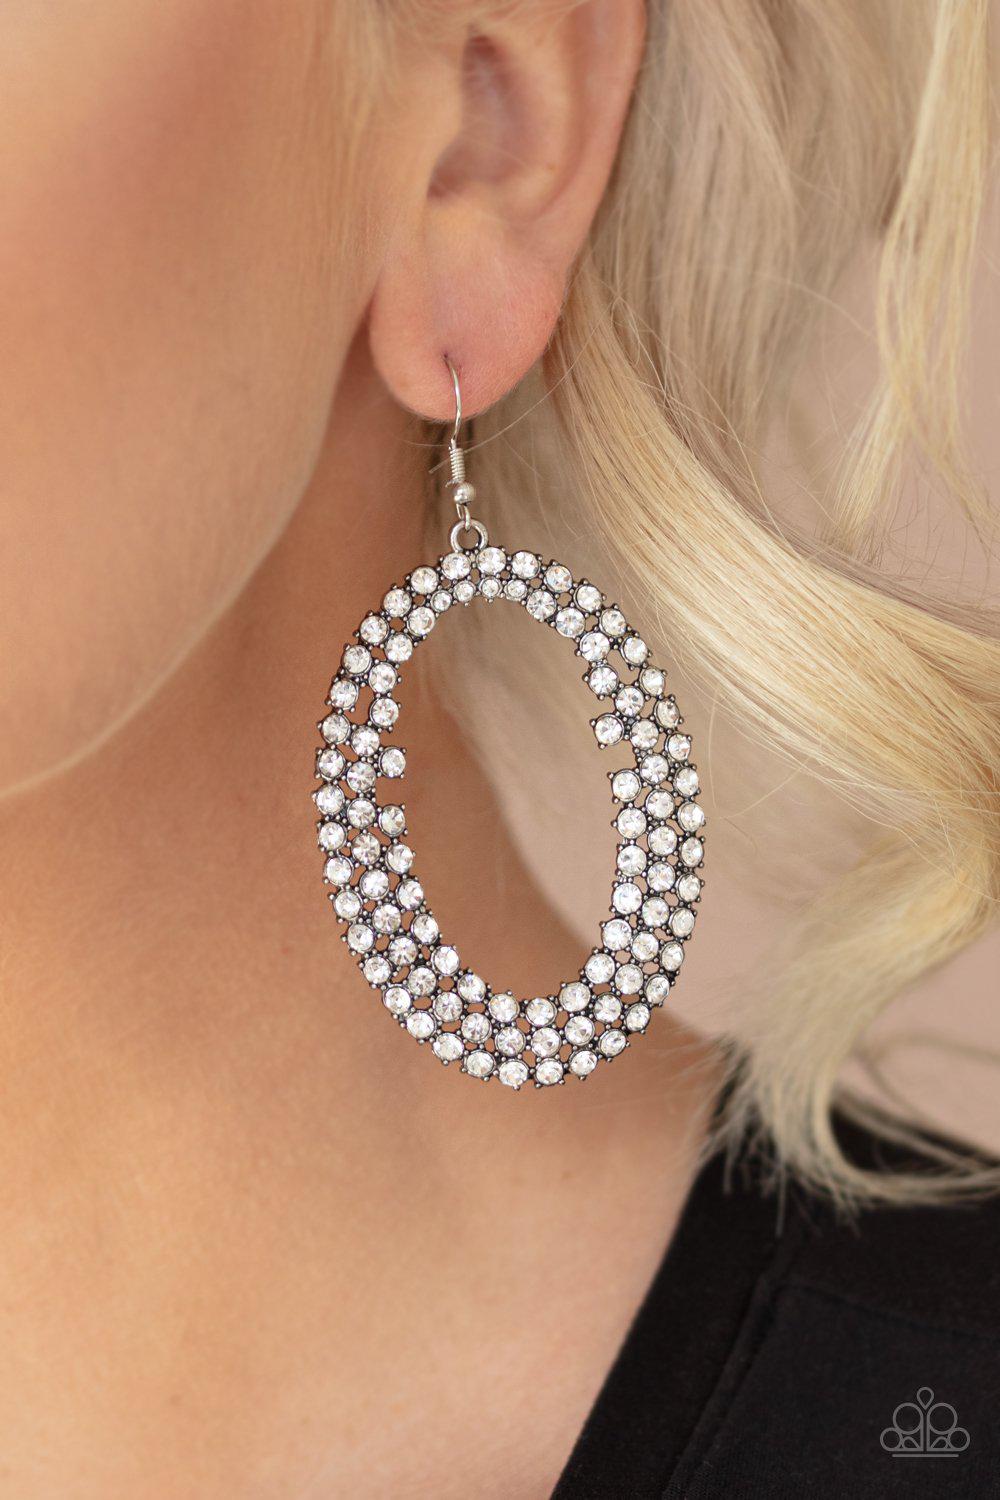 Radical Razzle White Rhinestone Earrings - Paparazzi Accessories LOTP Exclusive June 2020-CarasShop.com - $5 Jewelry by Cara Jewels